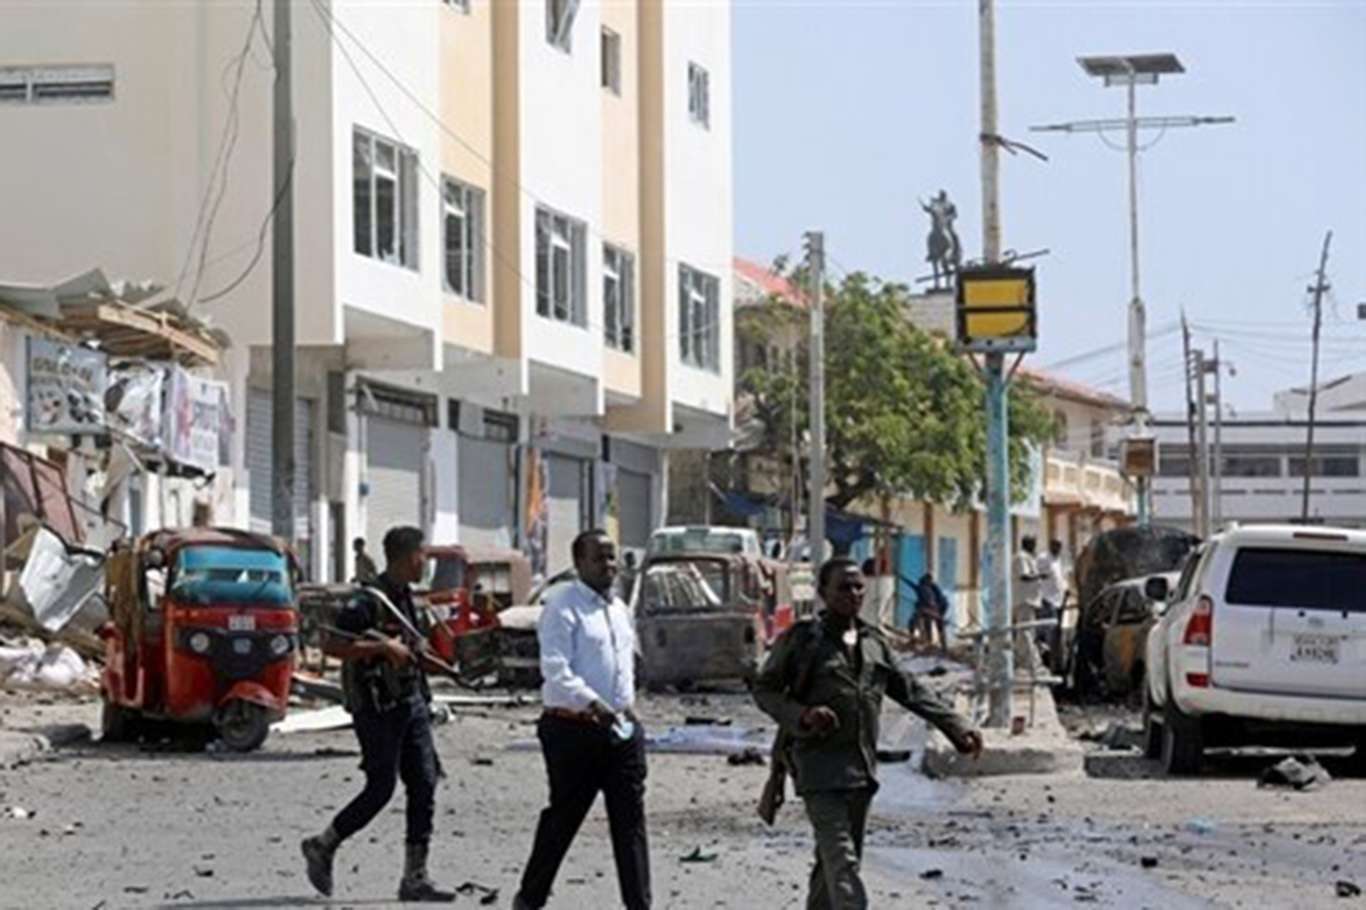 At least 8 people killed in suicide attack in Somalia’s capital Mogadishu